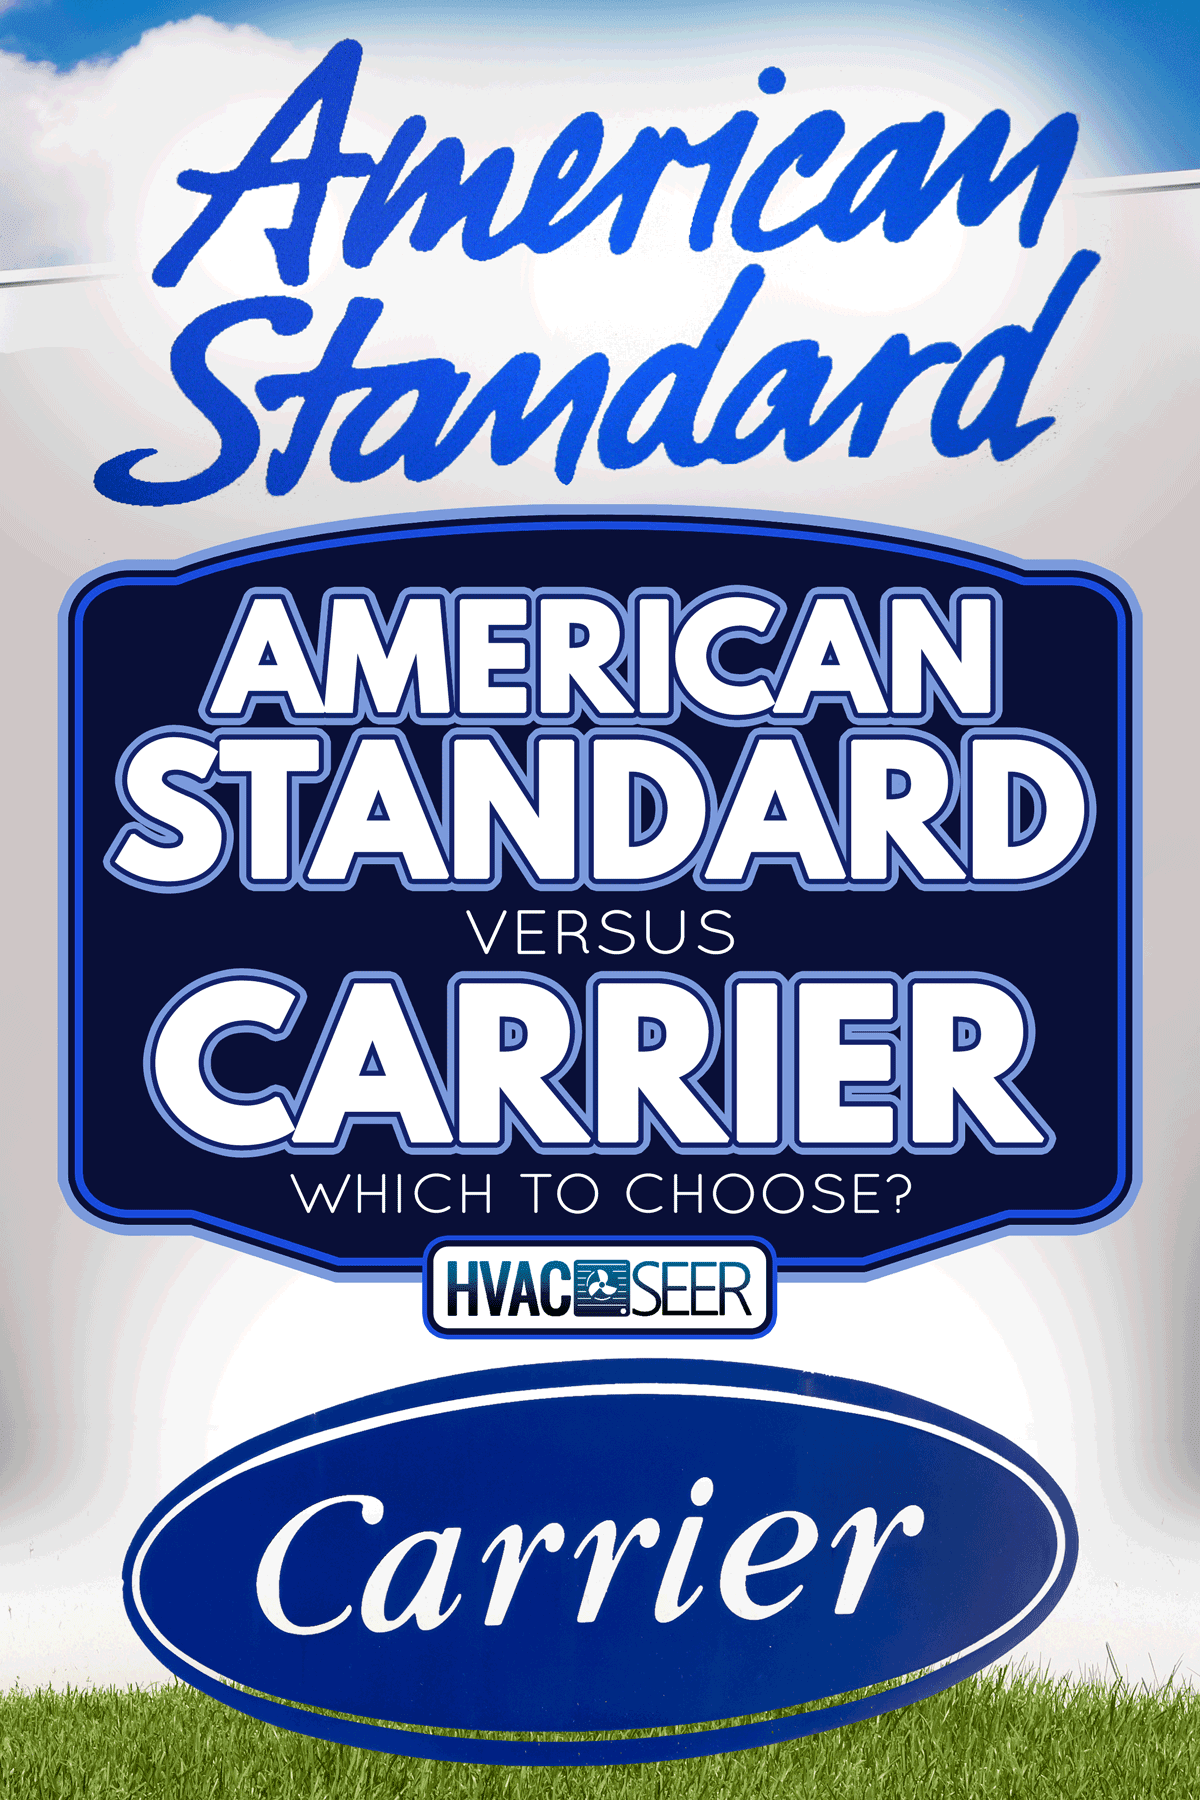 Comparison between two companies, American Standard Vs. Carrier: Which To Choose?